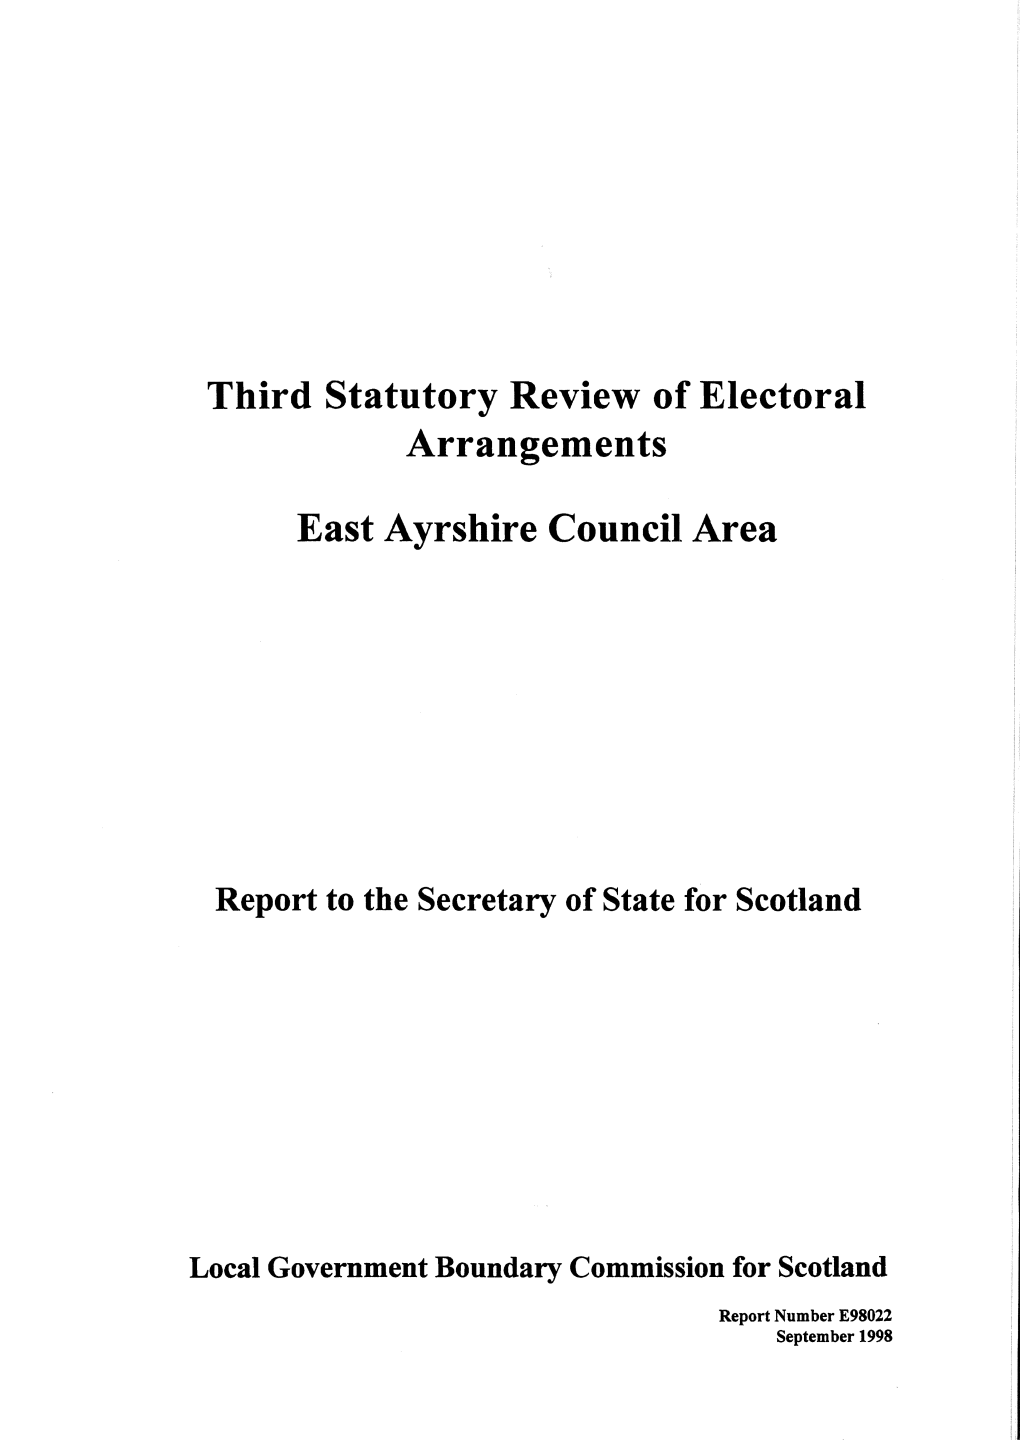 Third Statutory Review of Electoral Arrangements East Ayrshire Council Area I